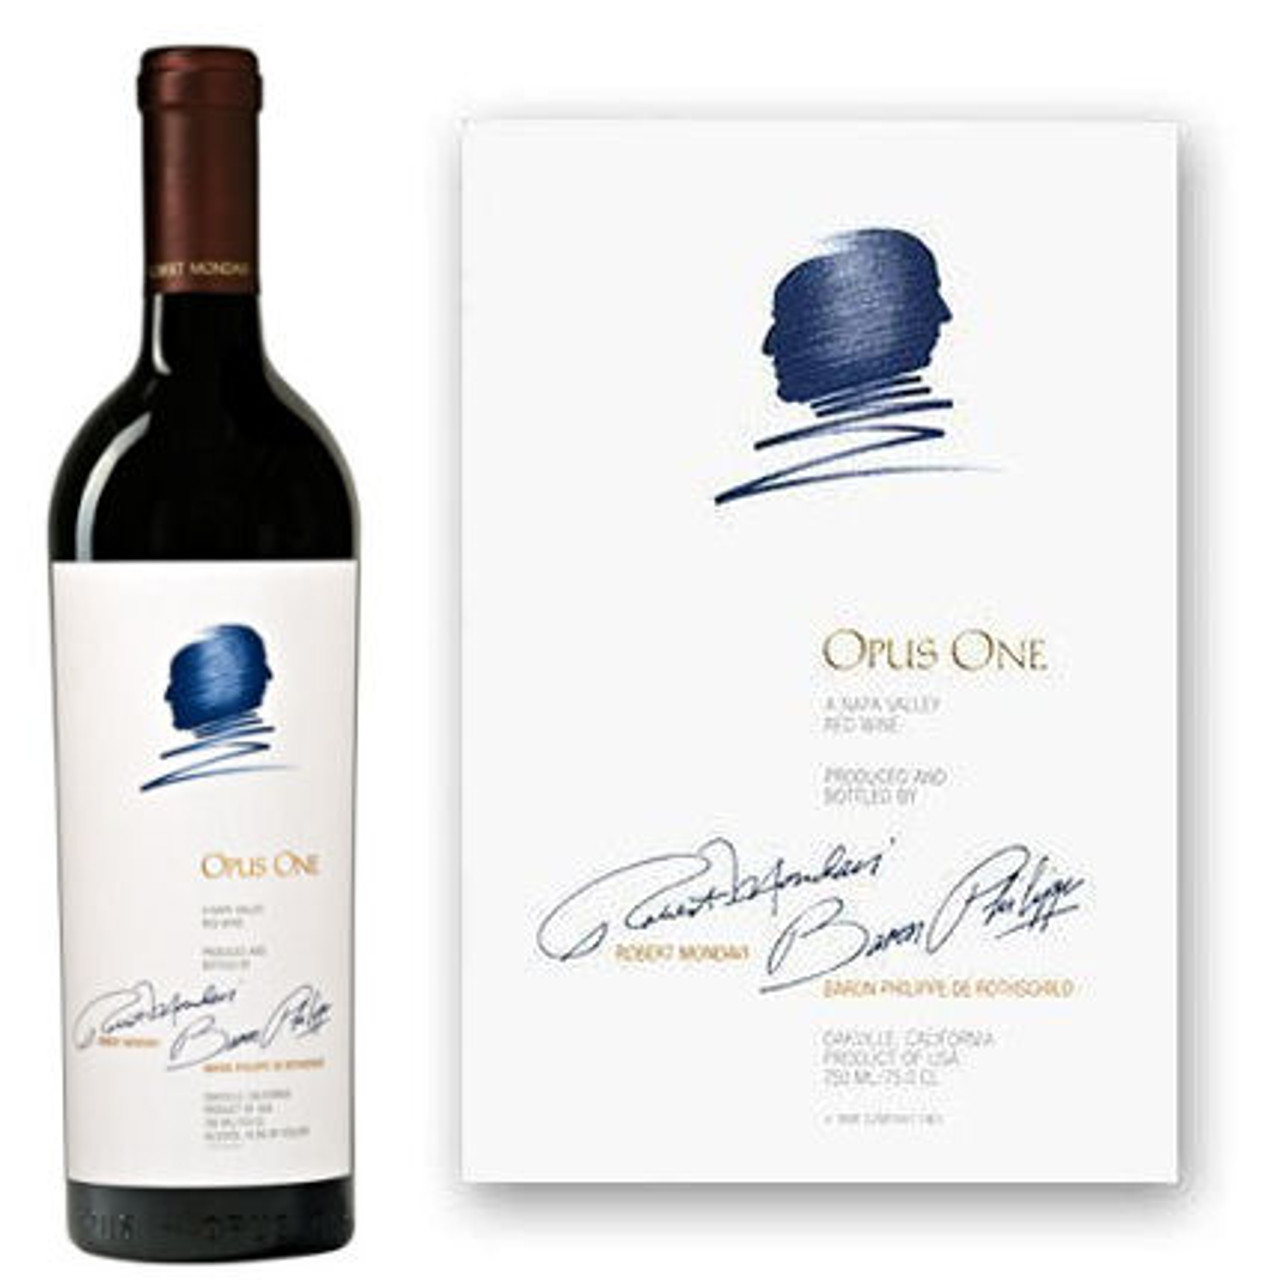 Opus One: A Symphony of Excellence in Napa Valley